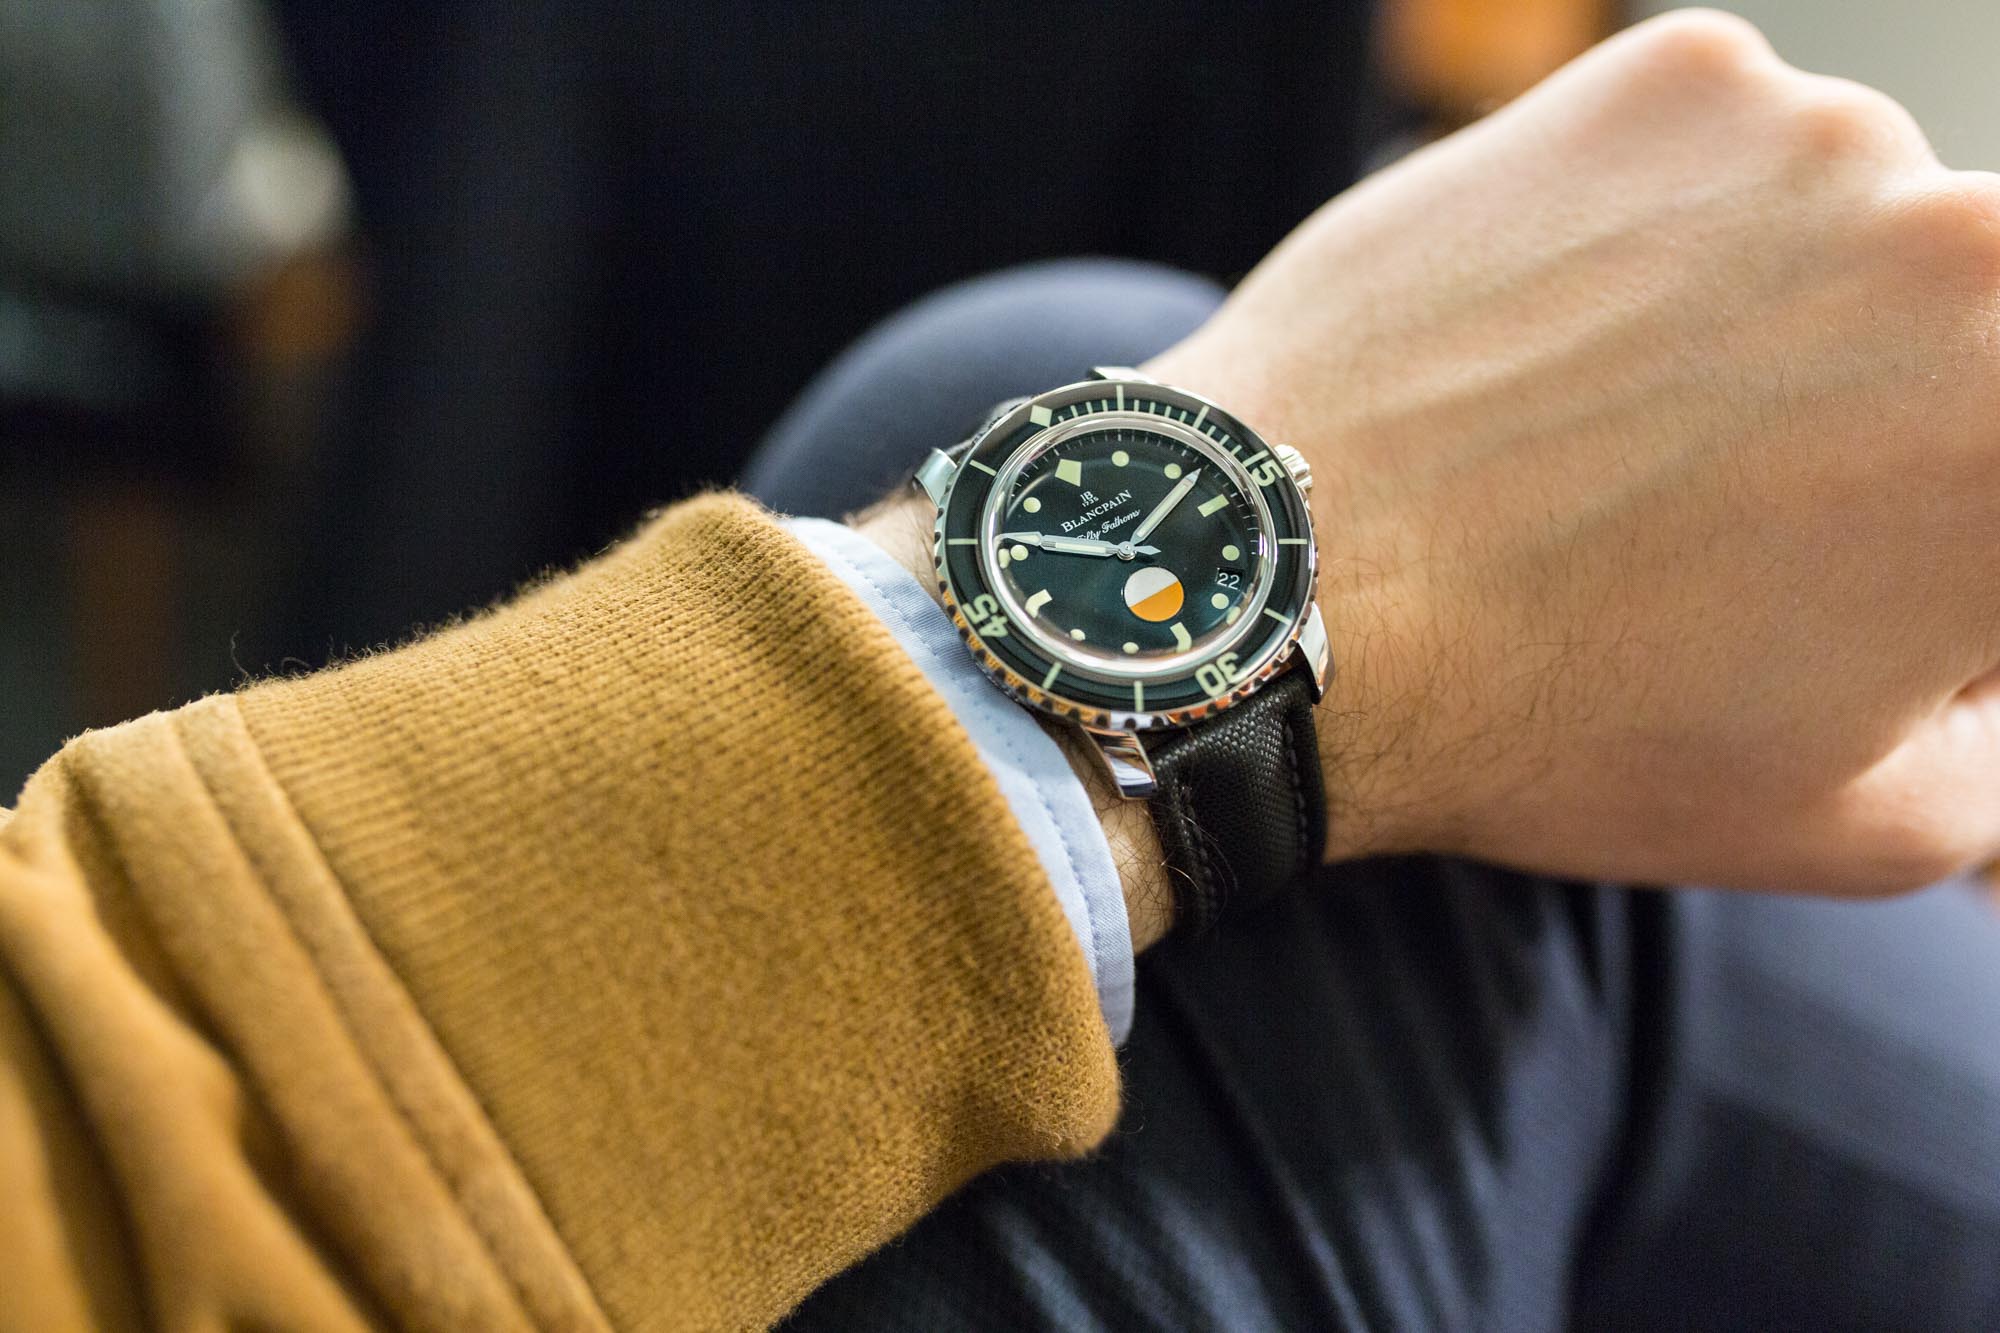 Baselworld 2017 - Blancpain Tribute to Fifty Fathoms MIL-SPEC